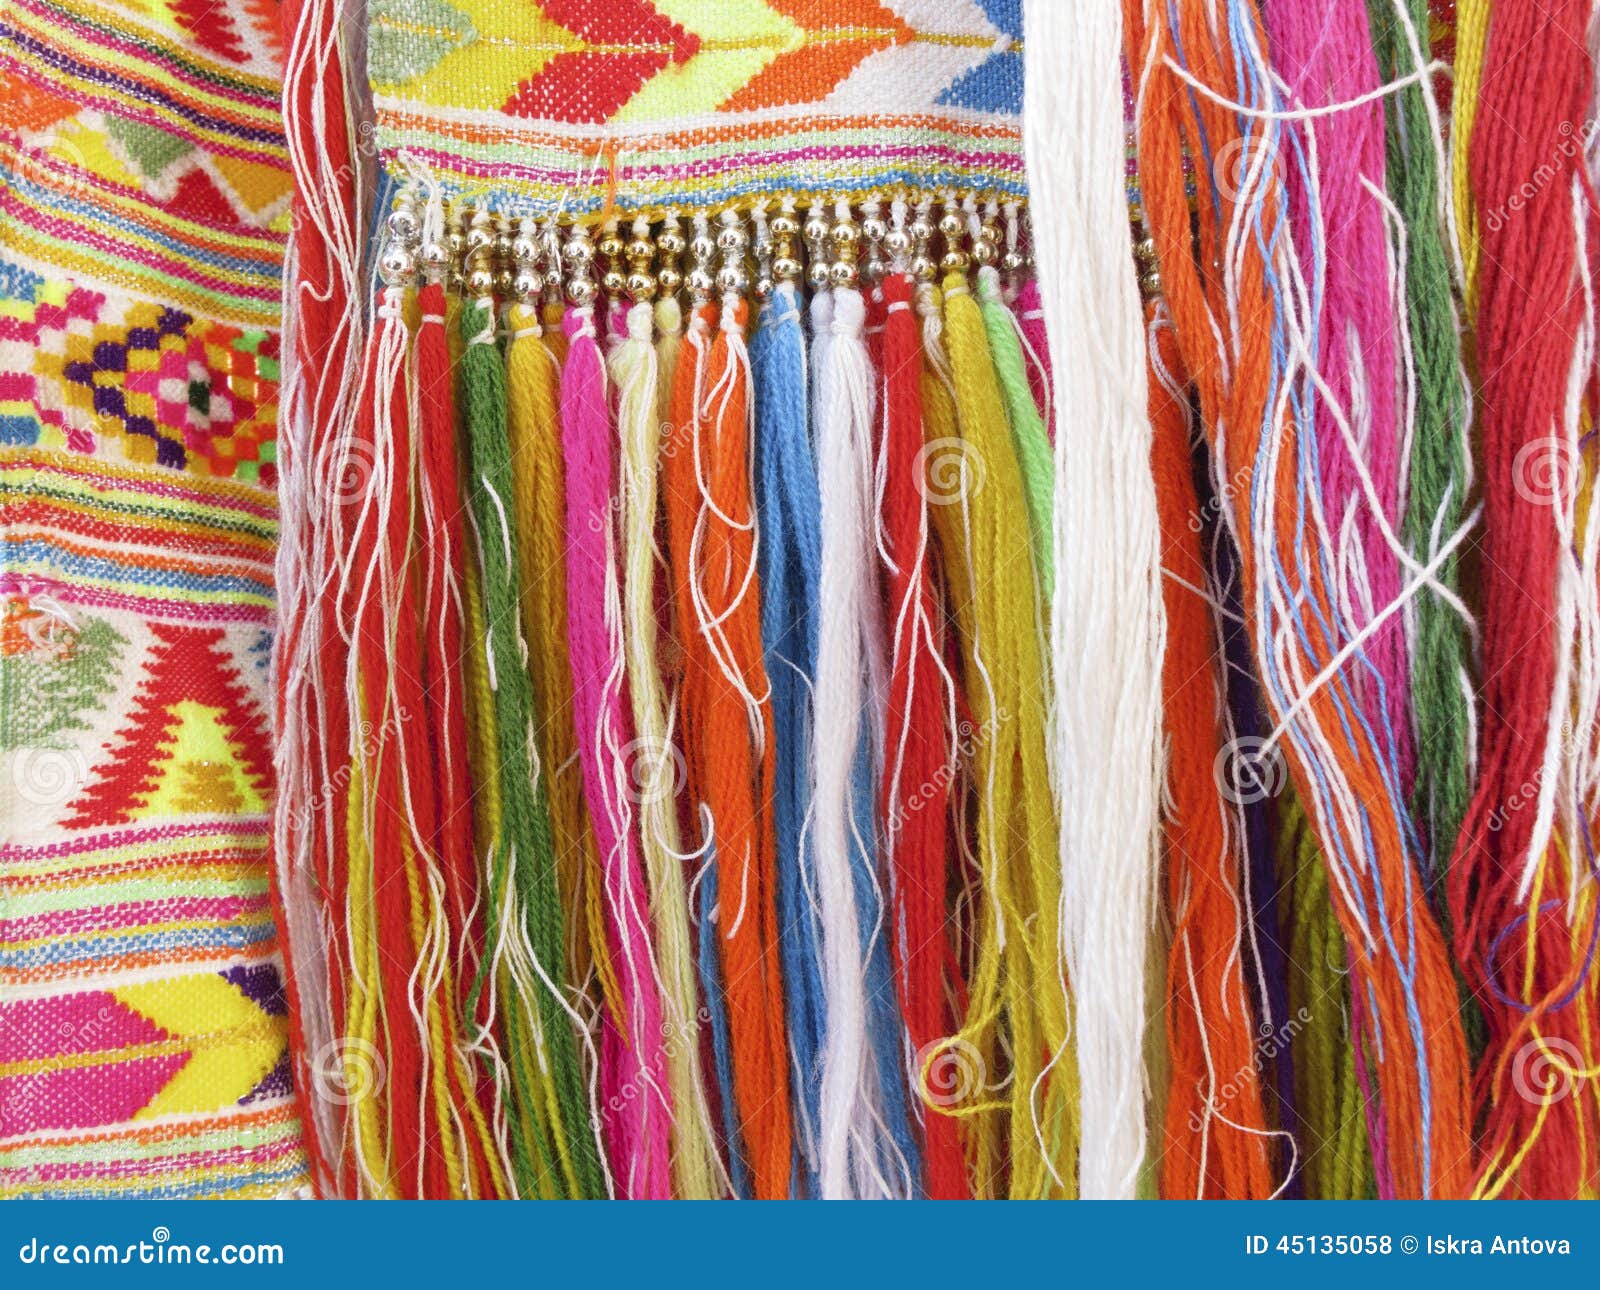 colourful fringes - part of beautiful handmade craft